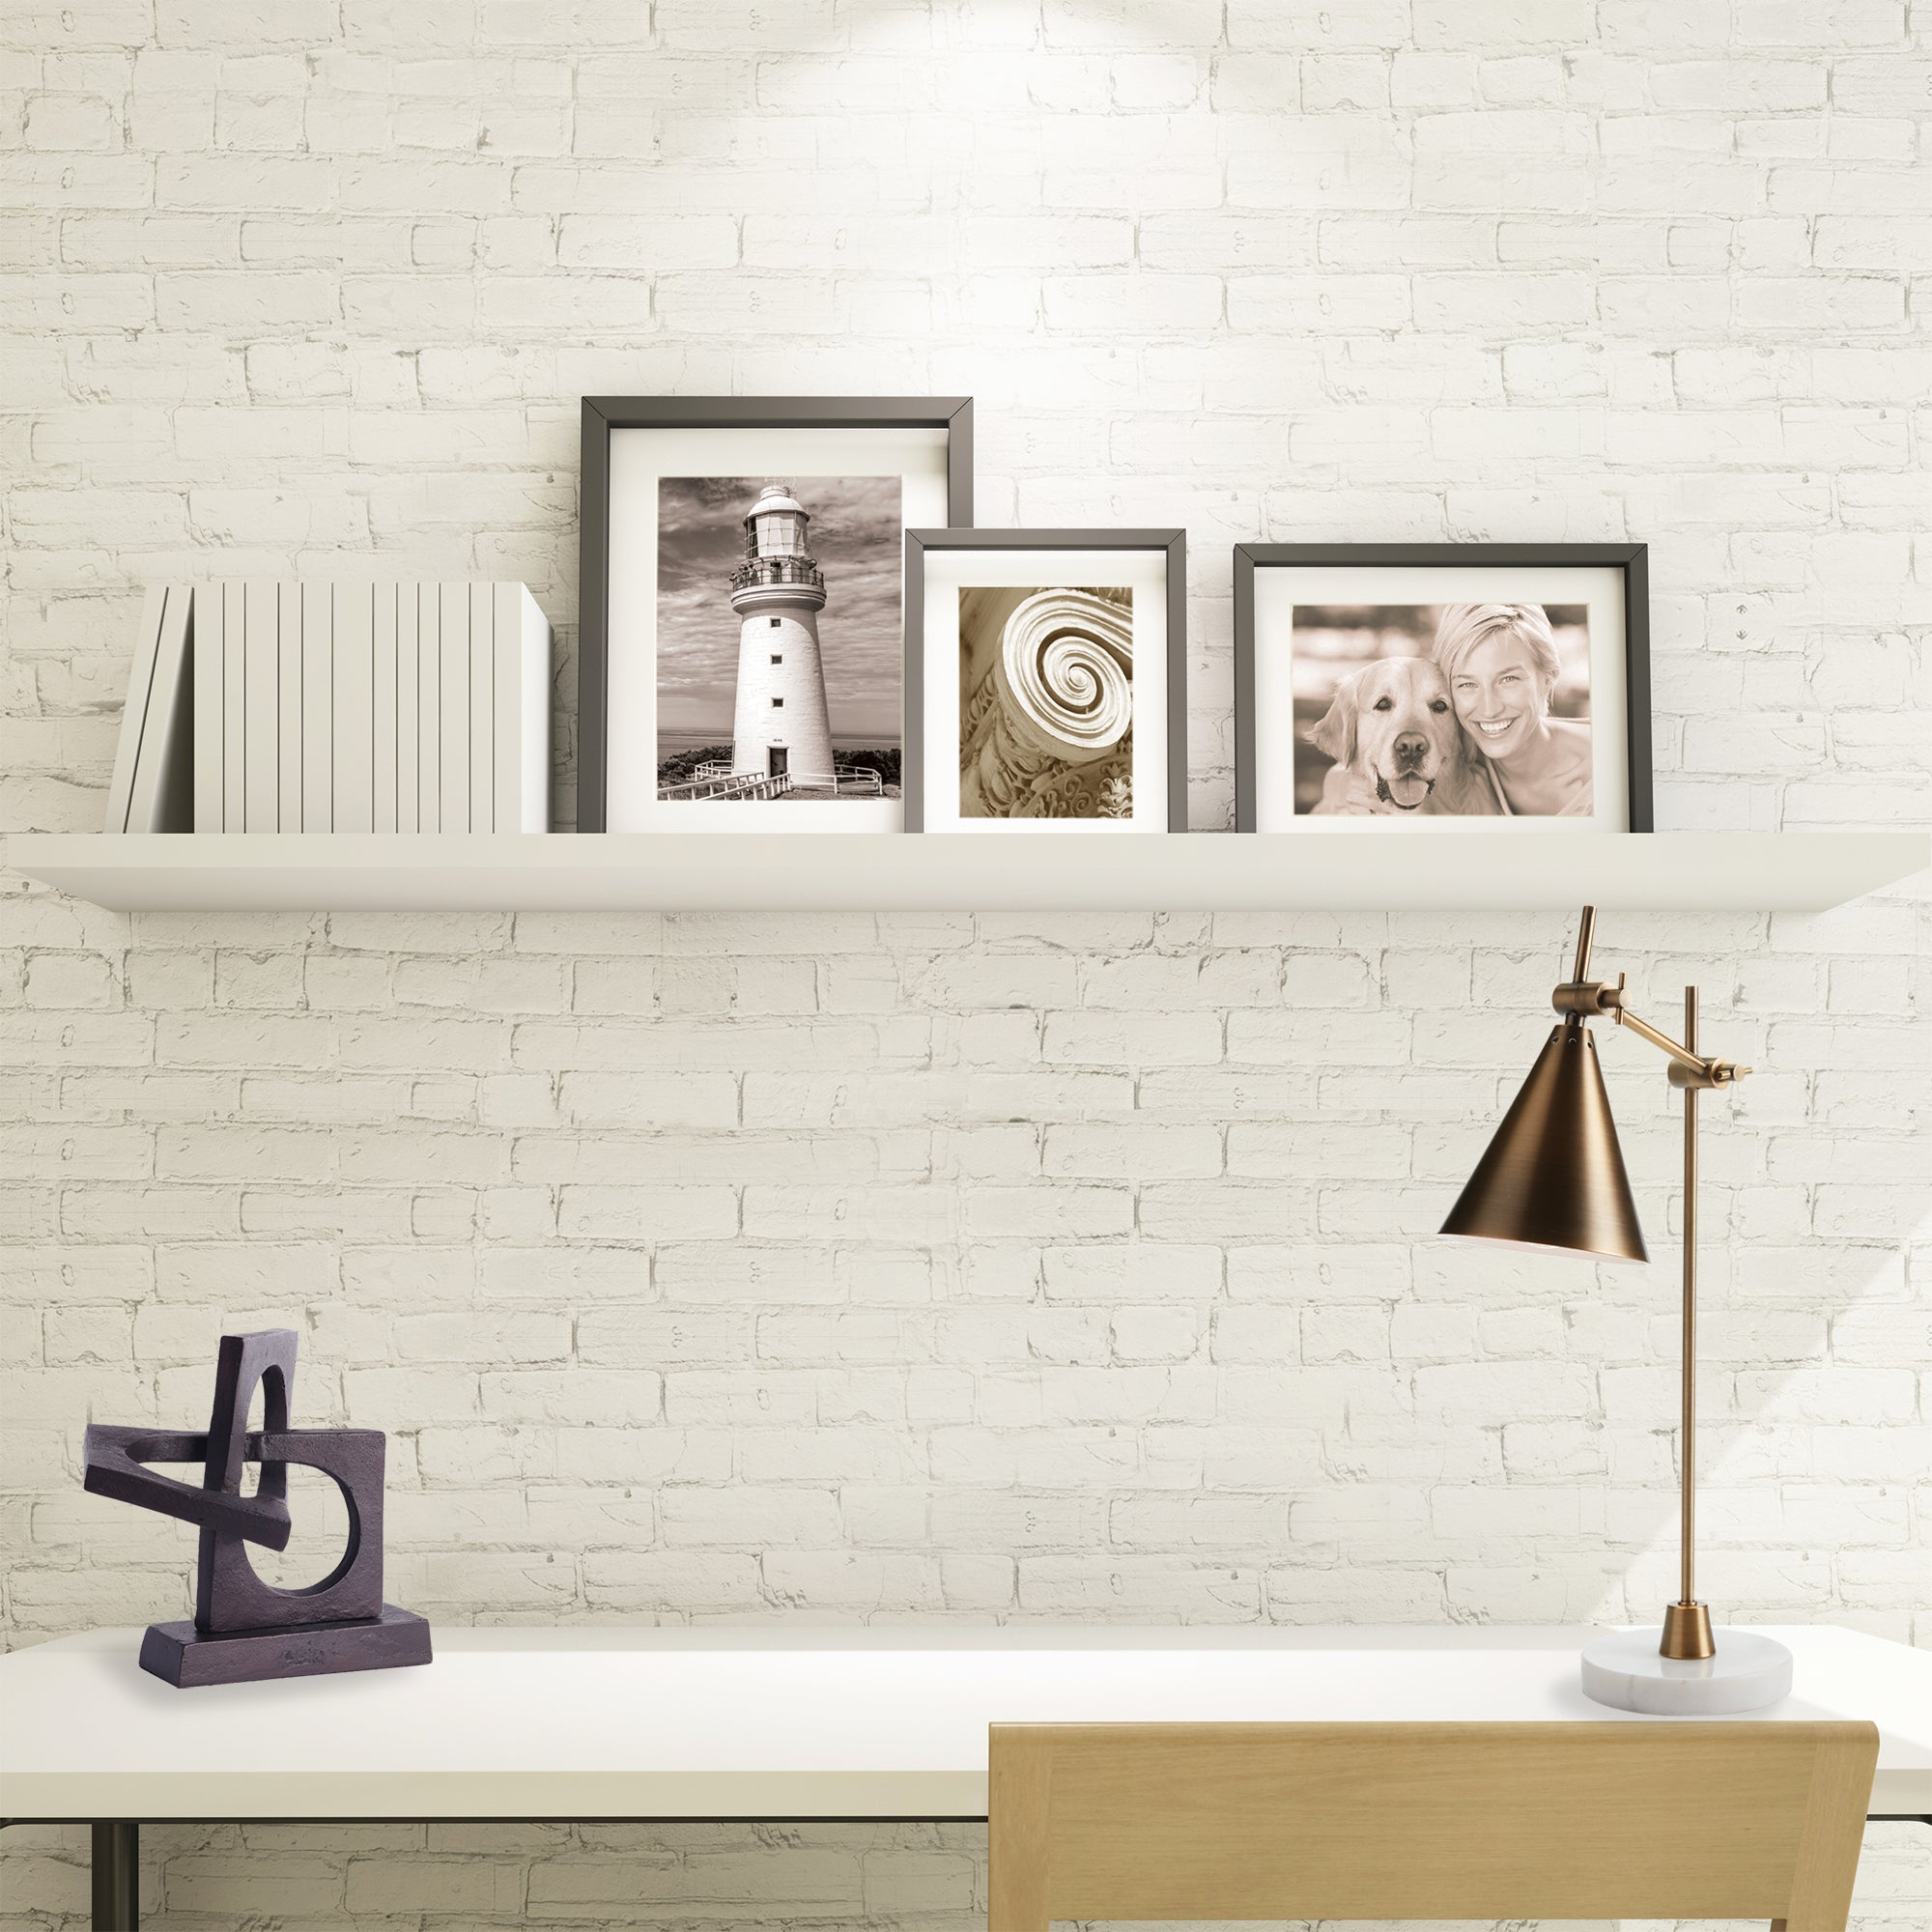 With a dually adjustable design, the Arnoldi Desk Lamp is modern architecture for the room. The brass finish and marble base give it a touch of classic elegance. Amethyst Home provides interior design, new construction, custom furniture, and area rugs in the Des Moines metro area.